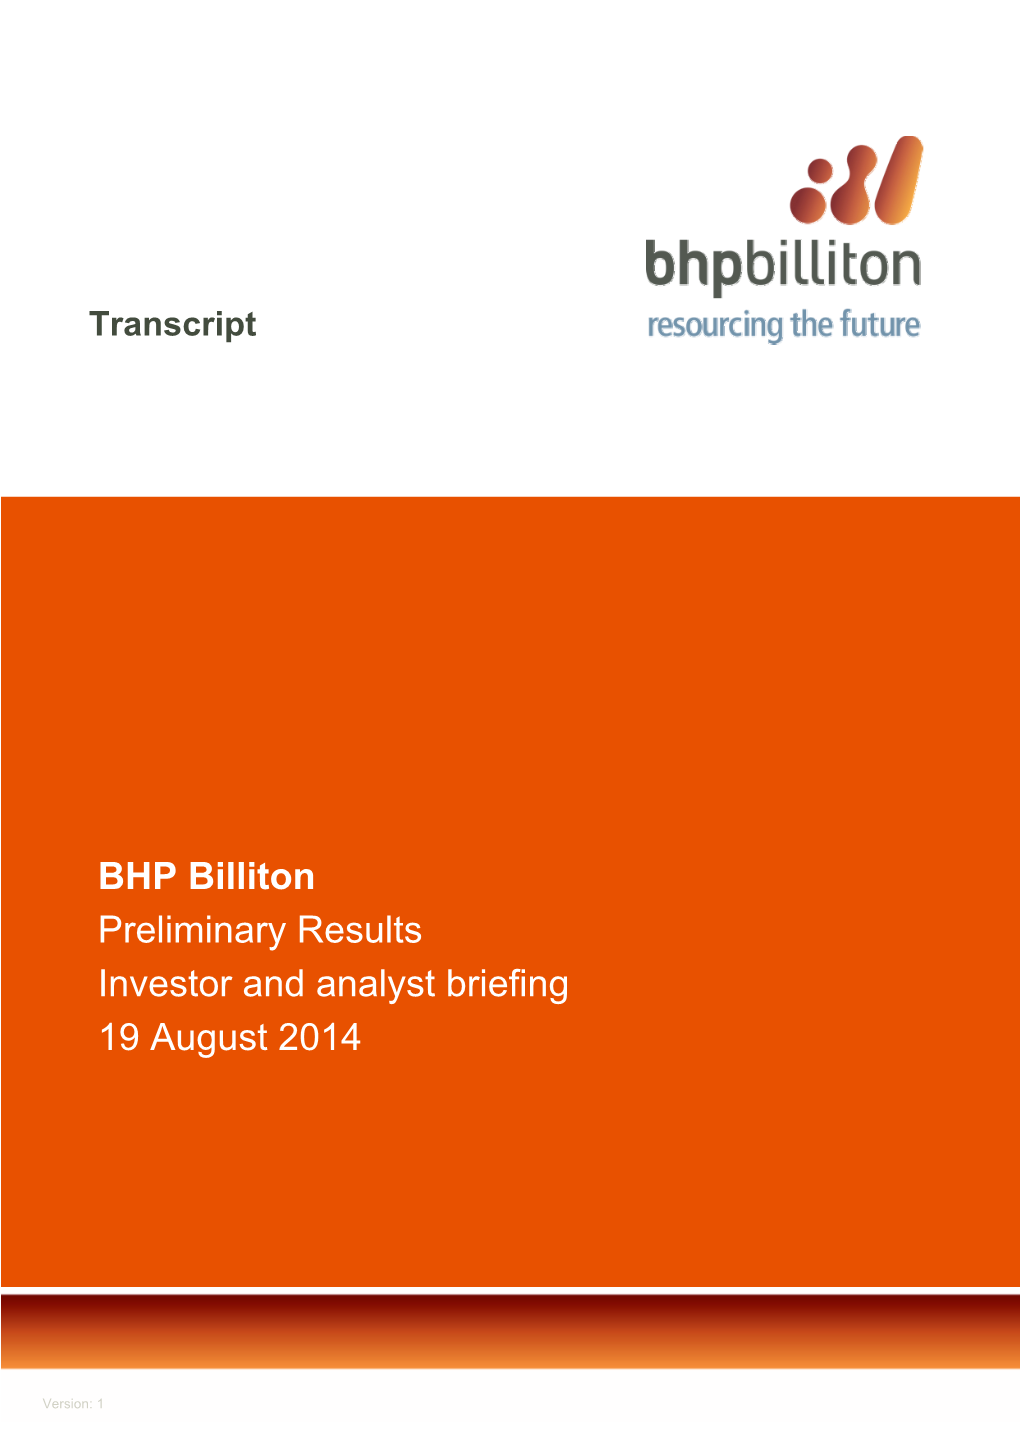 BHP Billiton Preliminary Results Investor and Analyst Briefing 19 August 2014